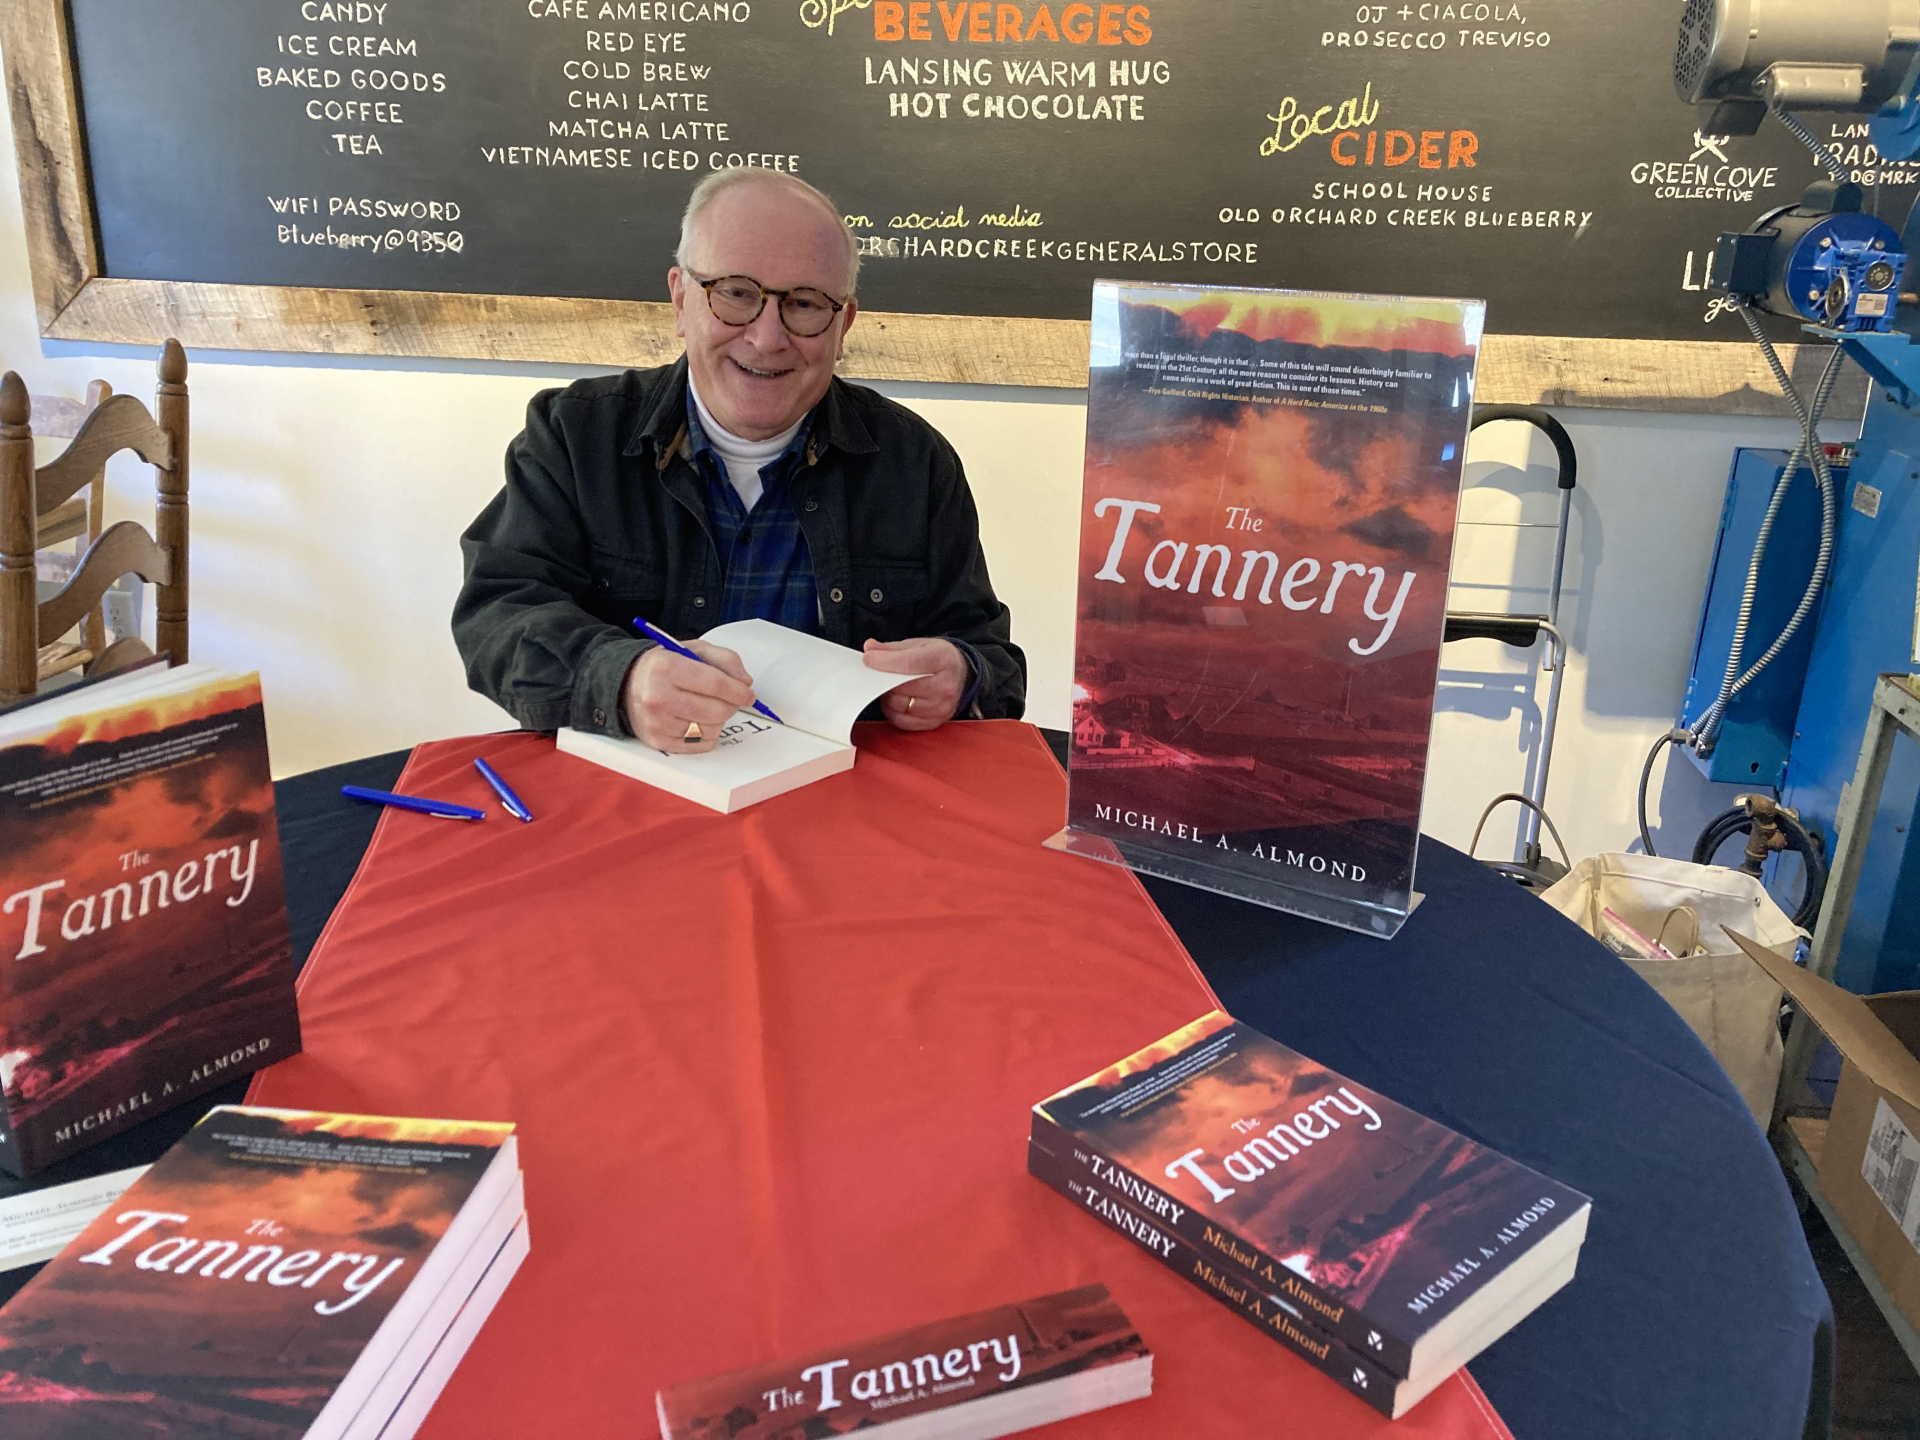 Michael Almond author of The Tannery